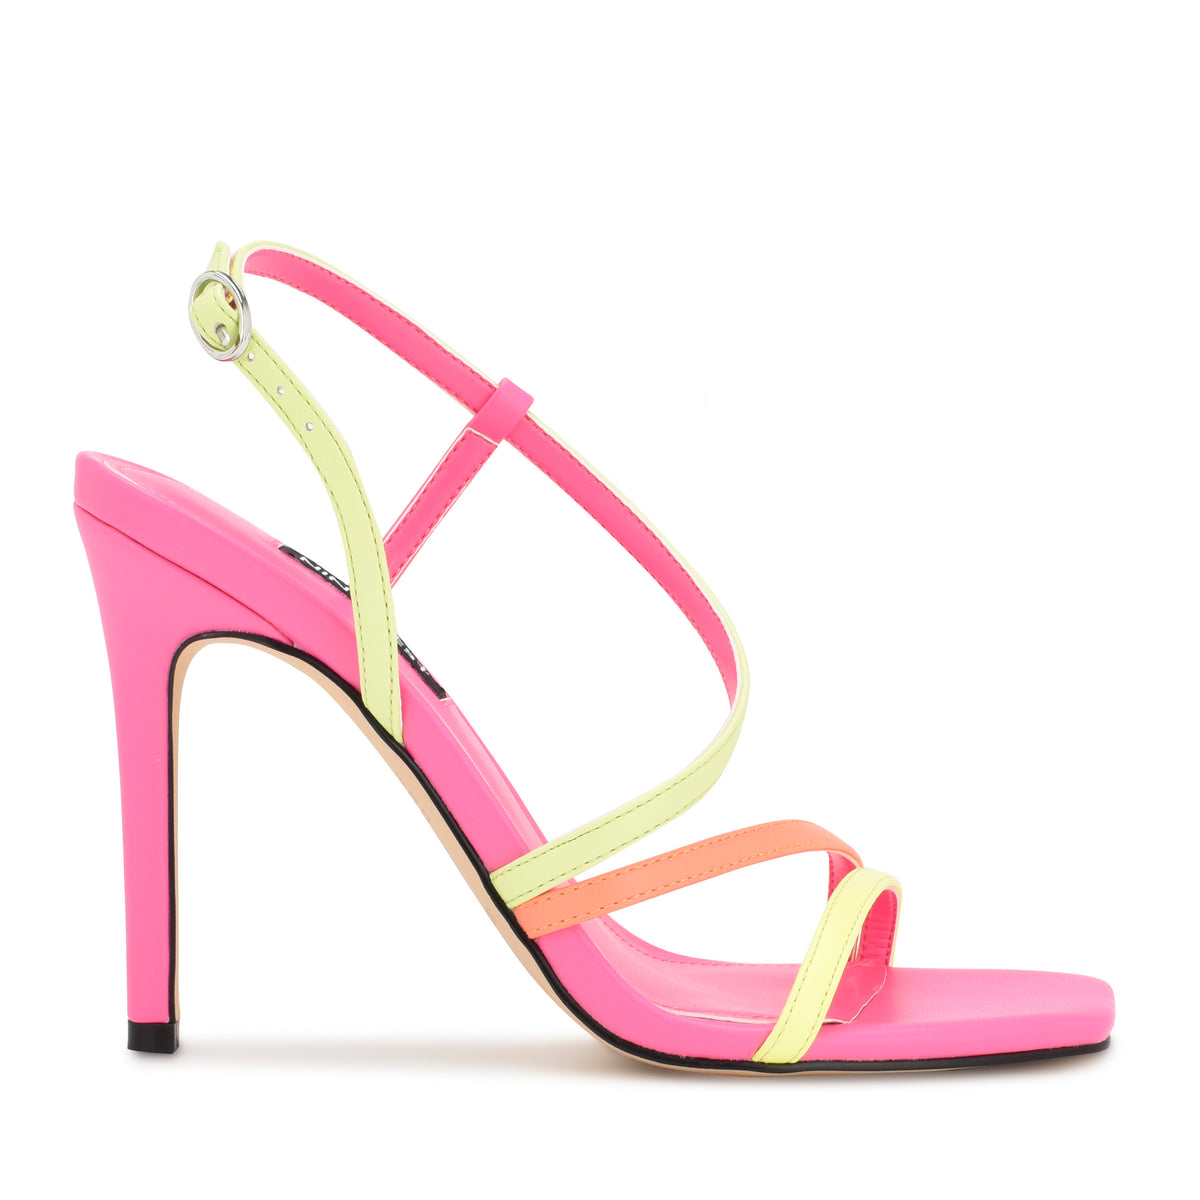 Trulee Strappy Heeled Sandals